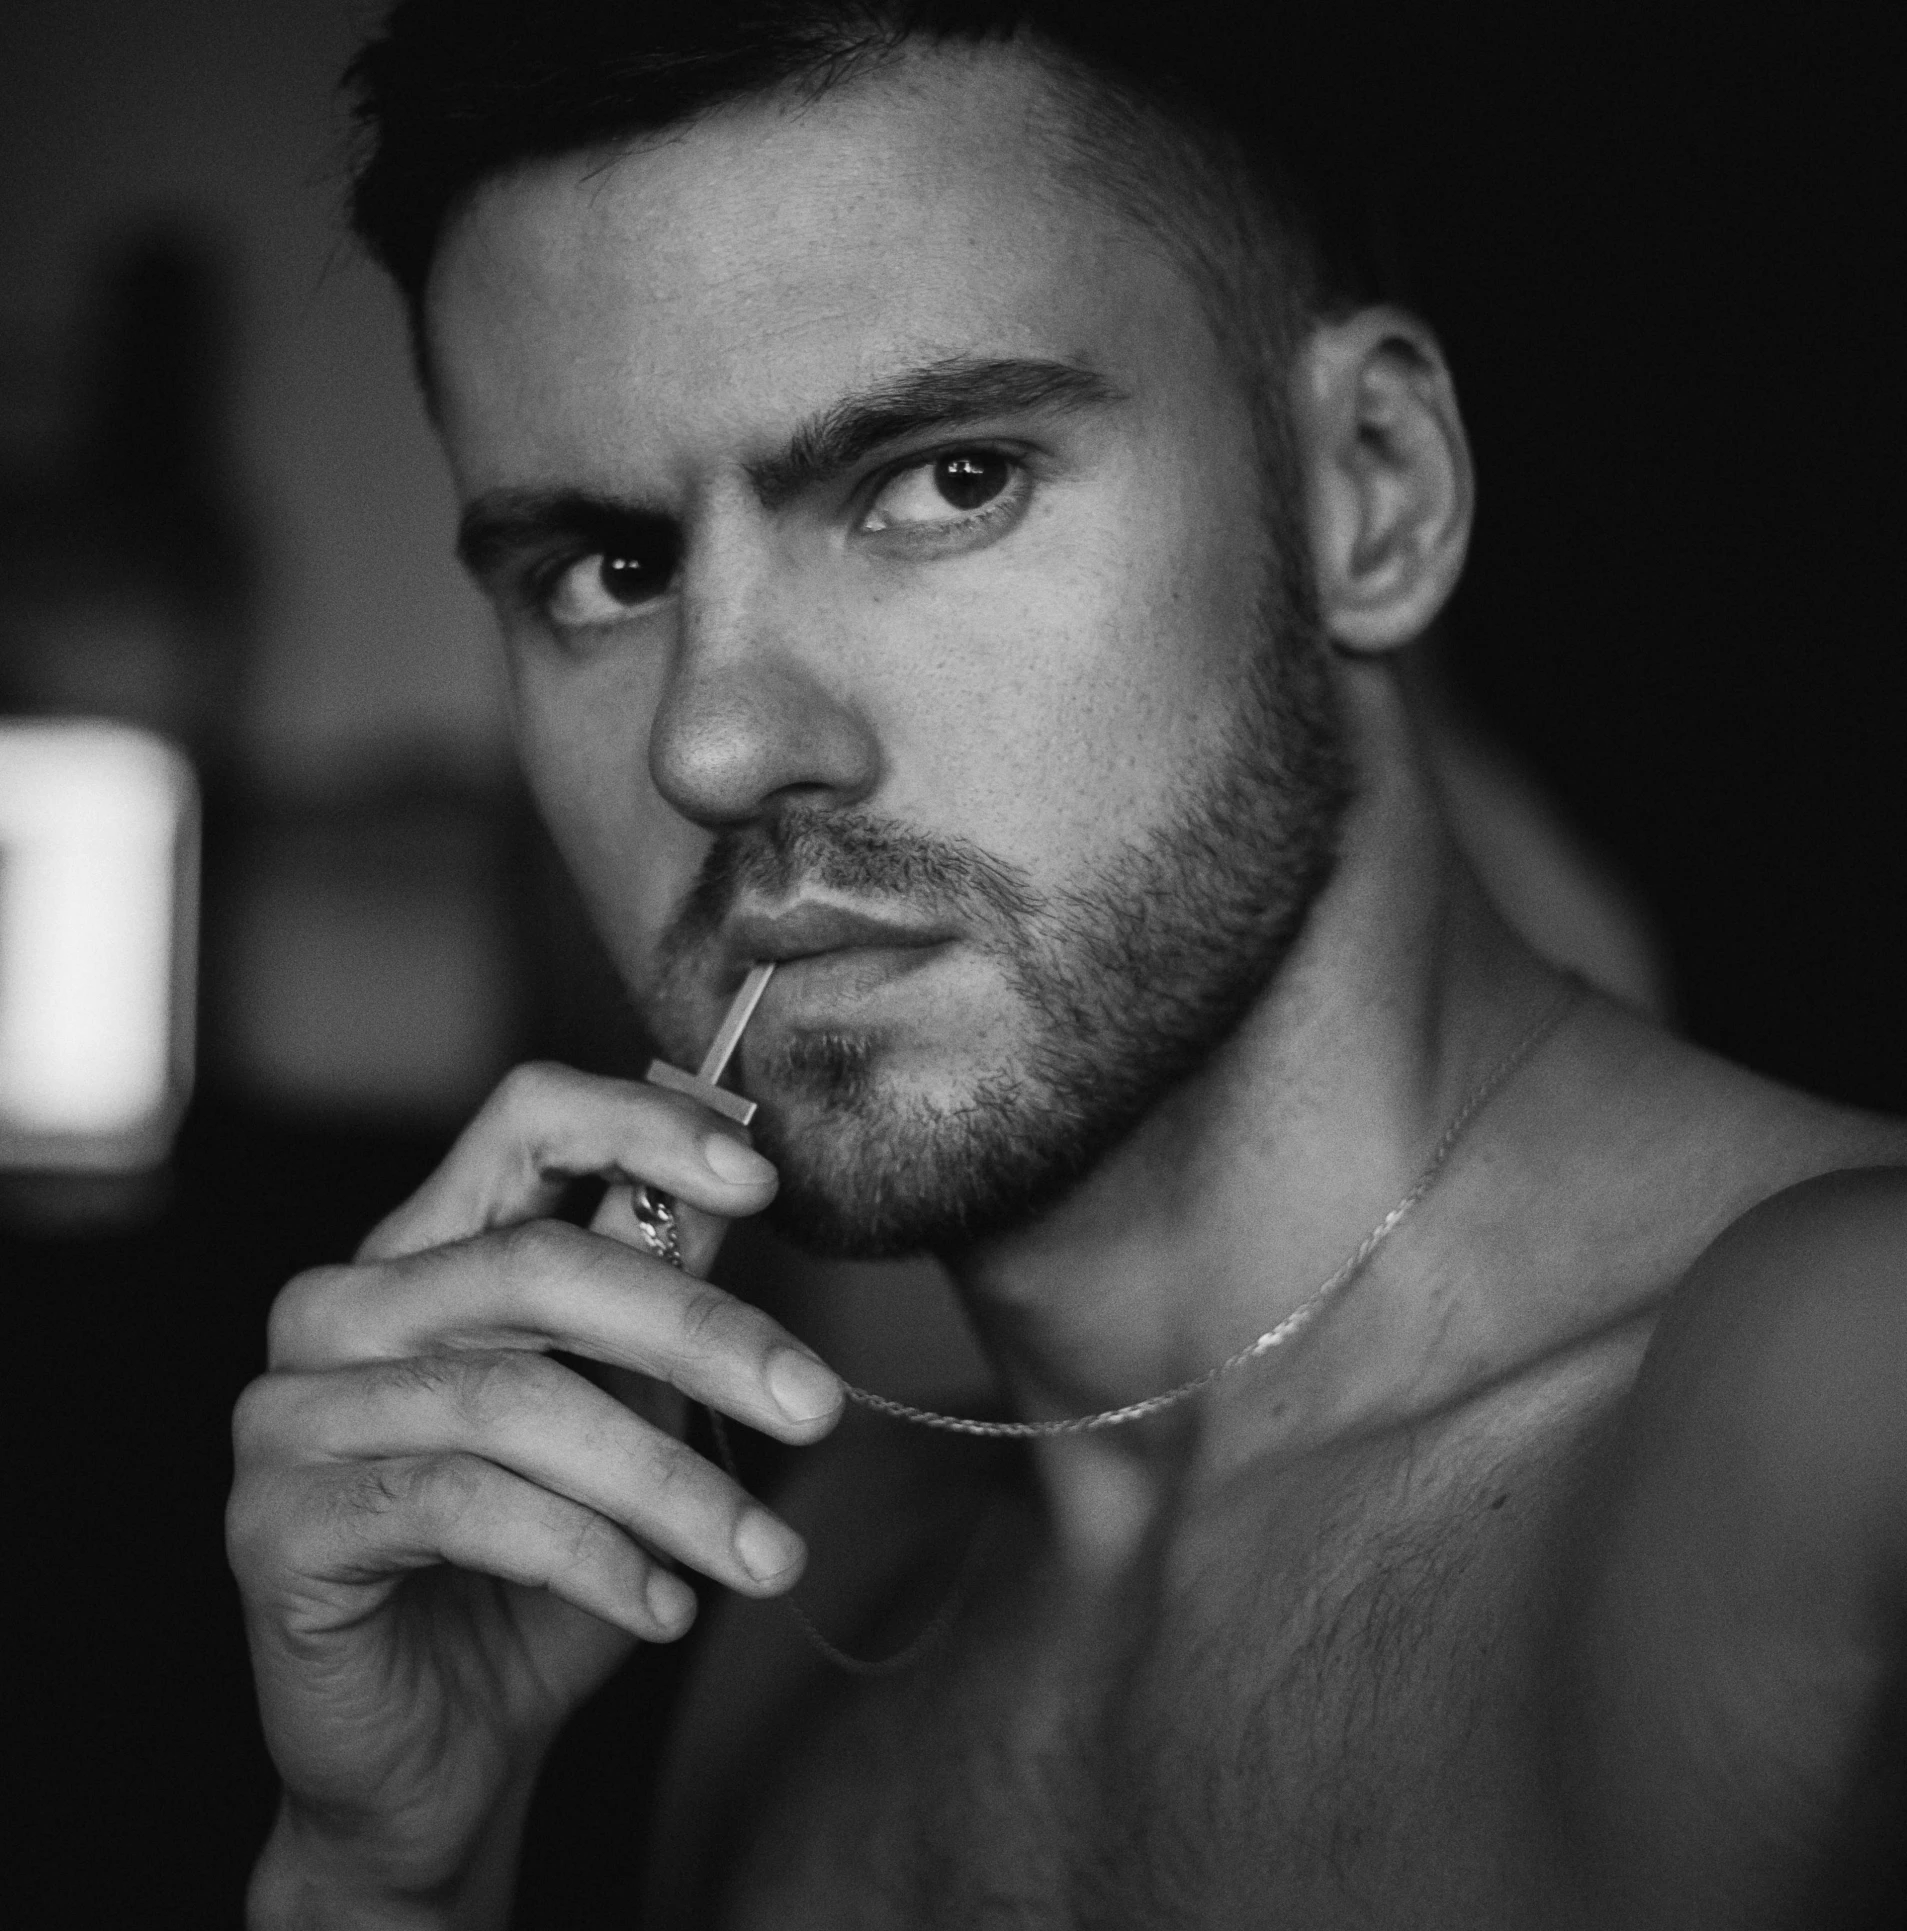 a shirtless man with a cigarette in his mouth, by Adam Marczyński, pexels contest winner, adriana chechik, square masculine jaw, cute young man, intense line work